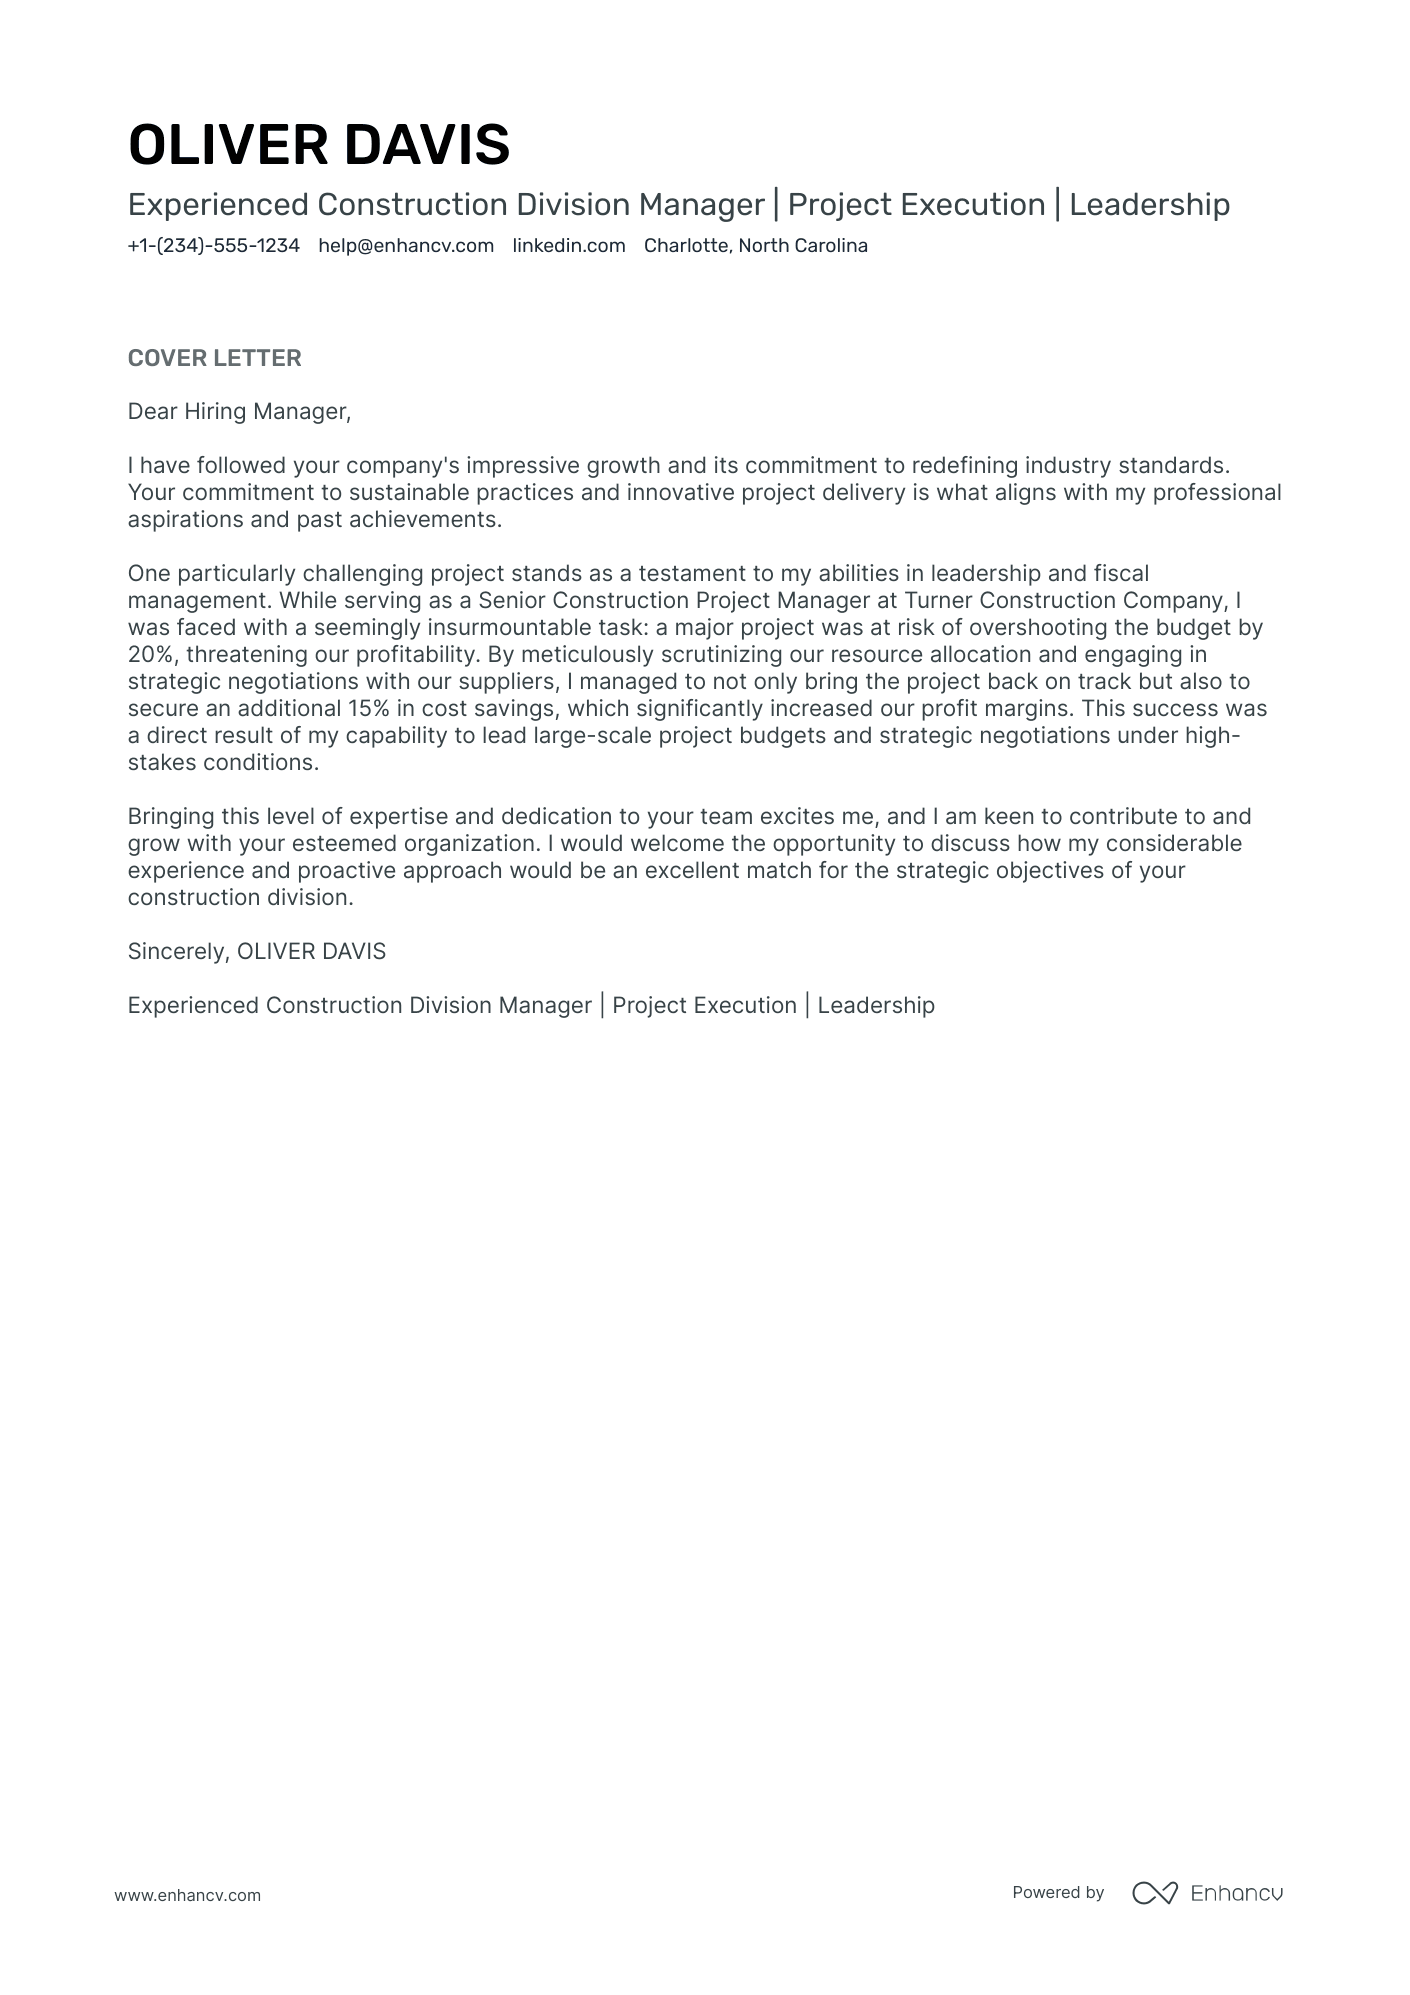 Division Manager cover letter